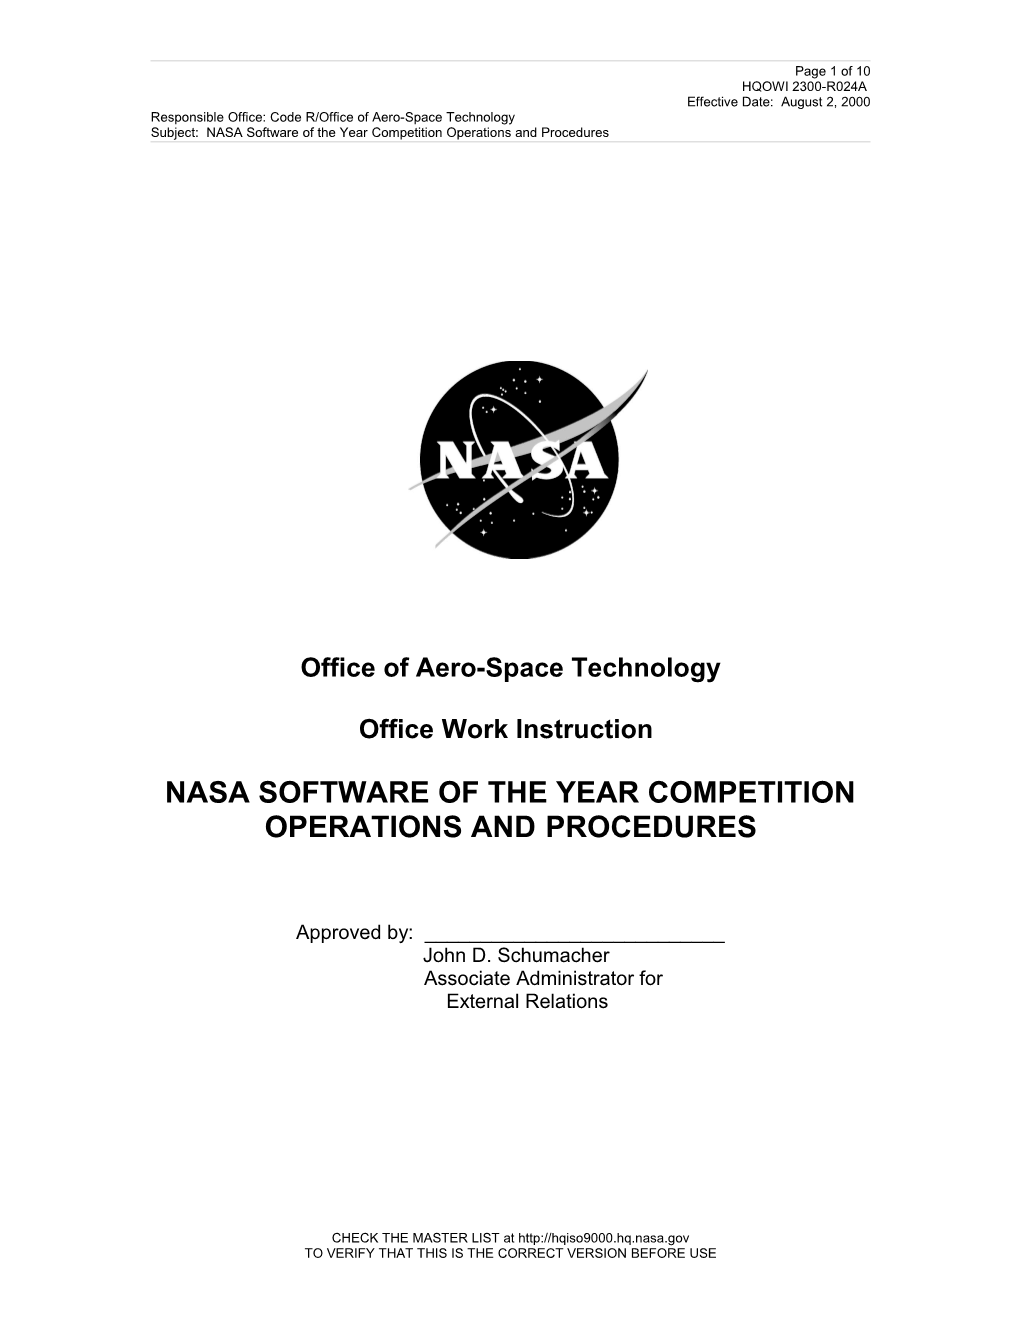 Responsible Office: Code R/Office of Aero-Space Technology